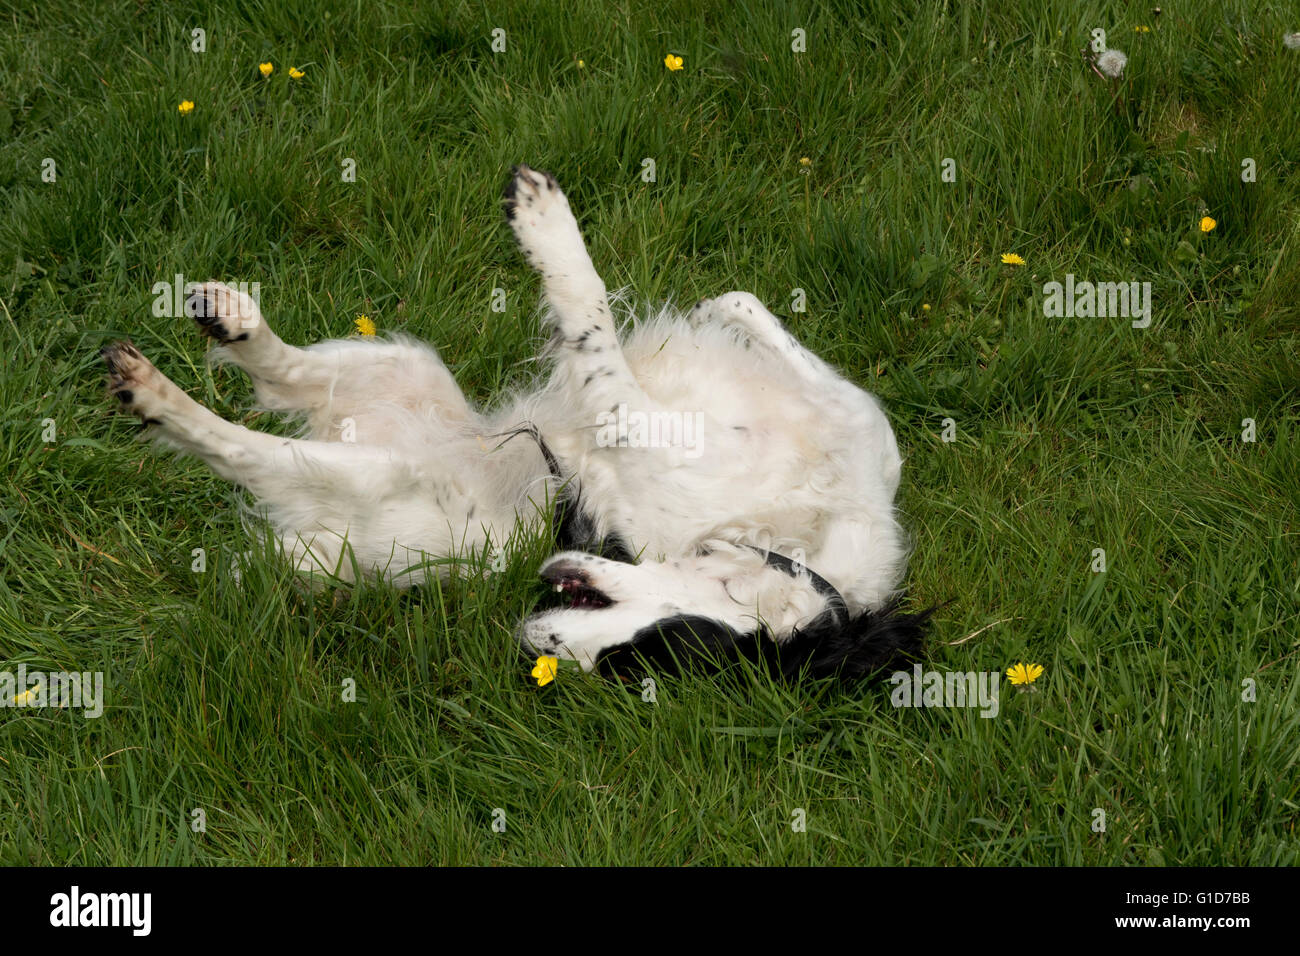 A cocker spaniel dog rolling on something smelly in the grass Stock Photo